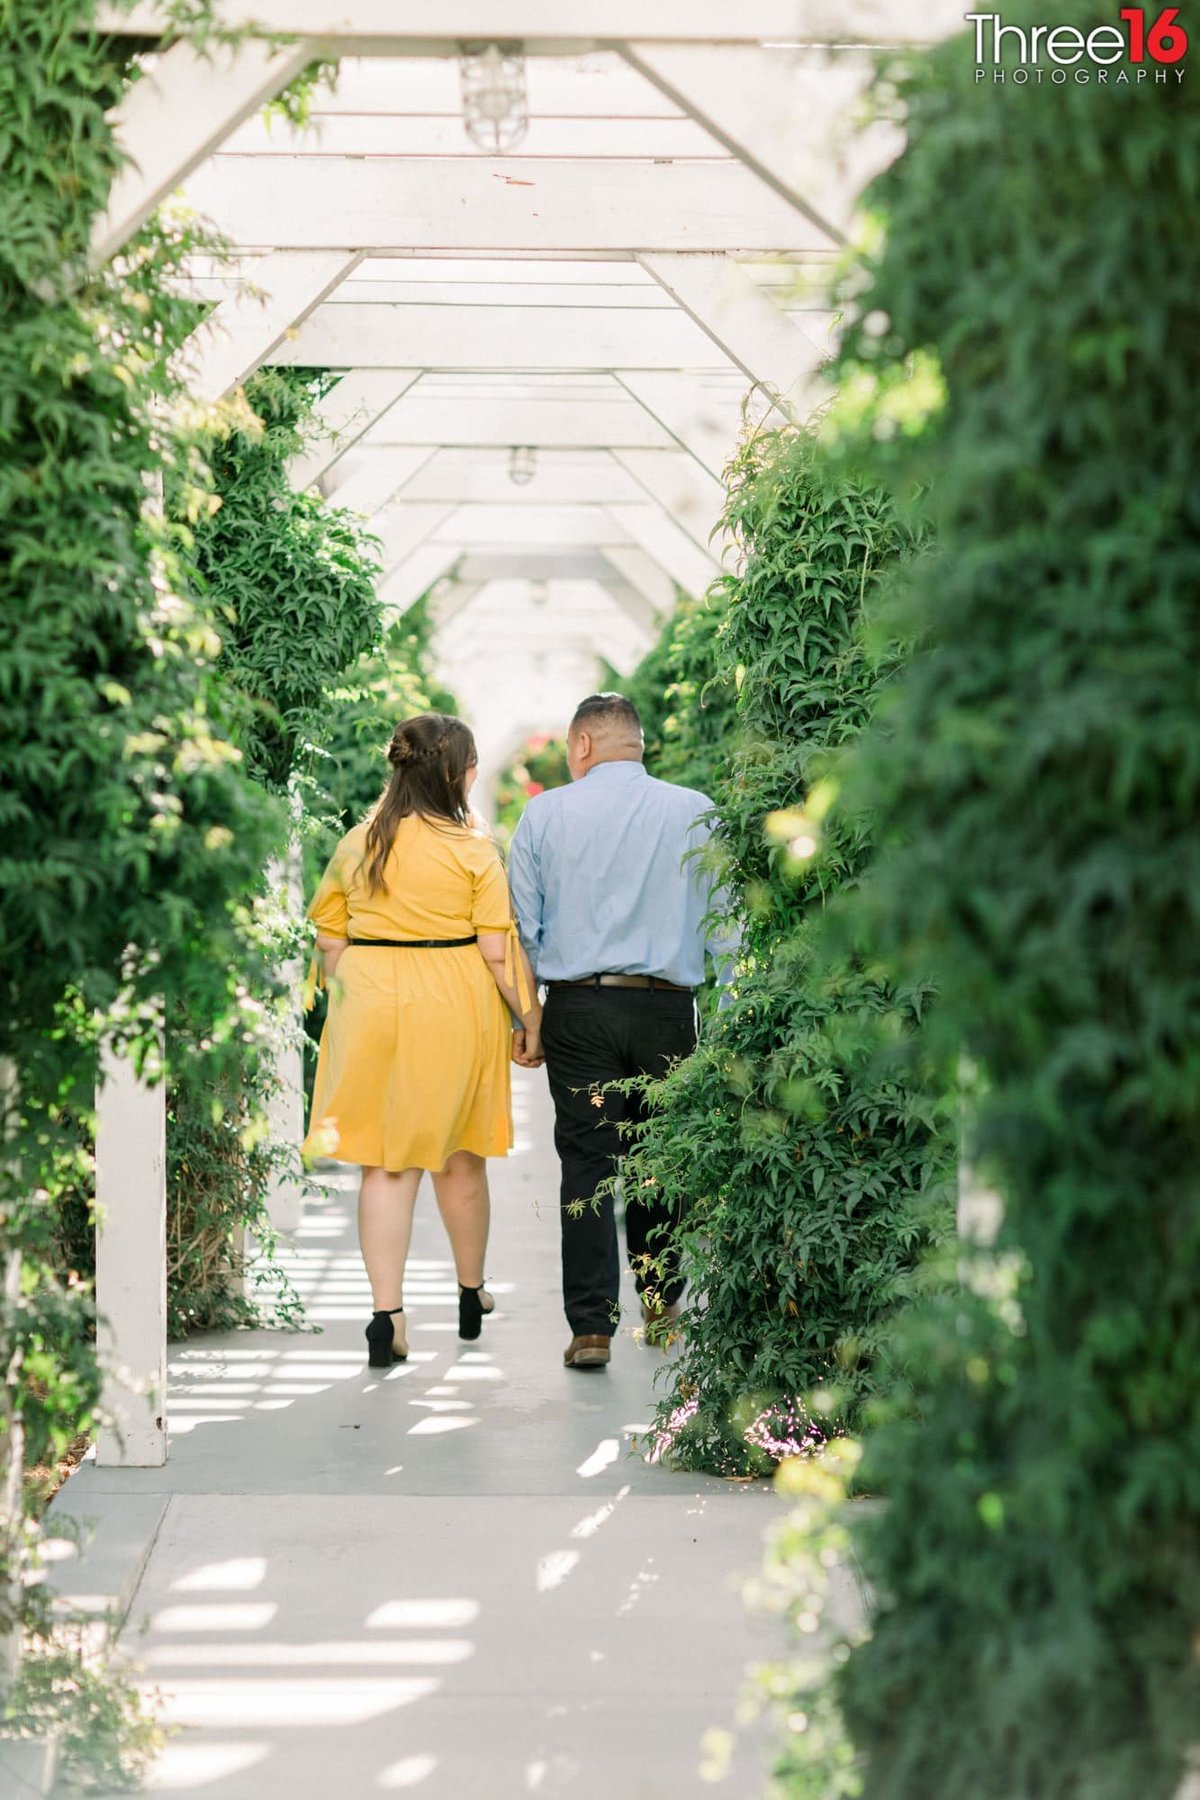 Engaged couple go for a walk amongst the planted shrubbery